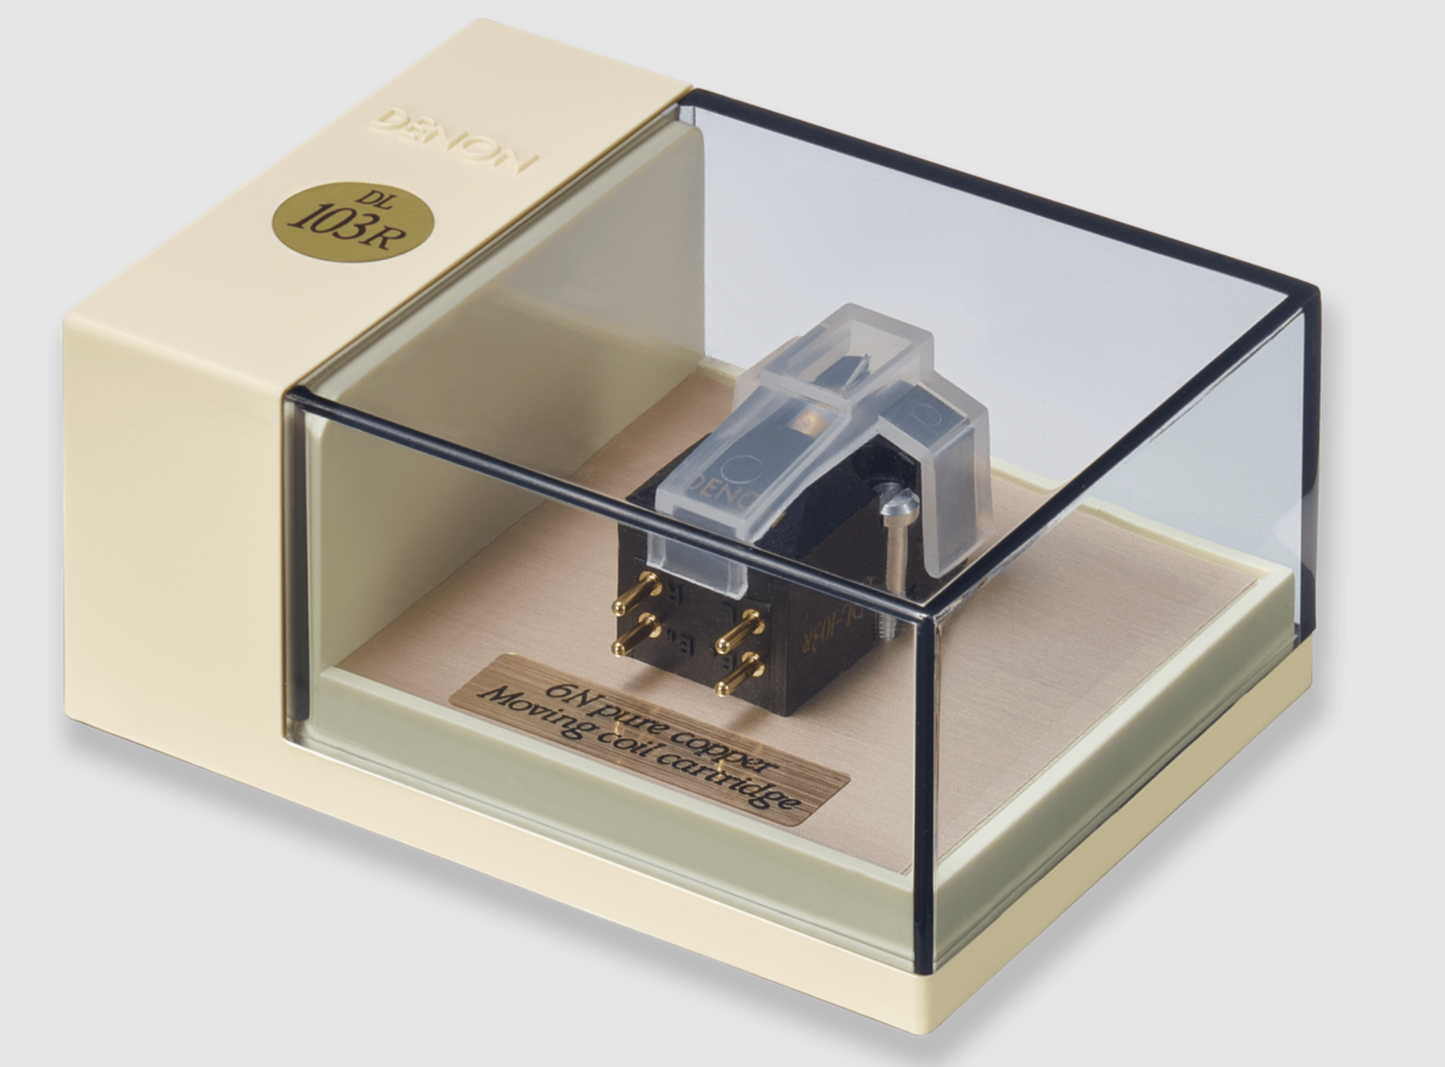 Denon DL-103R Moving Coil Cartridge, in packaging